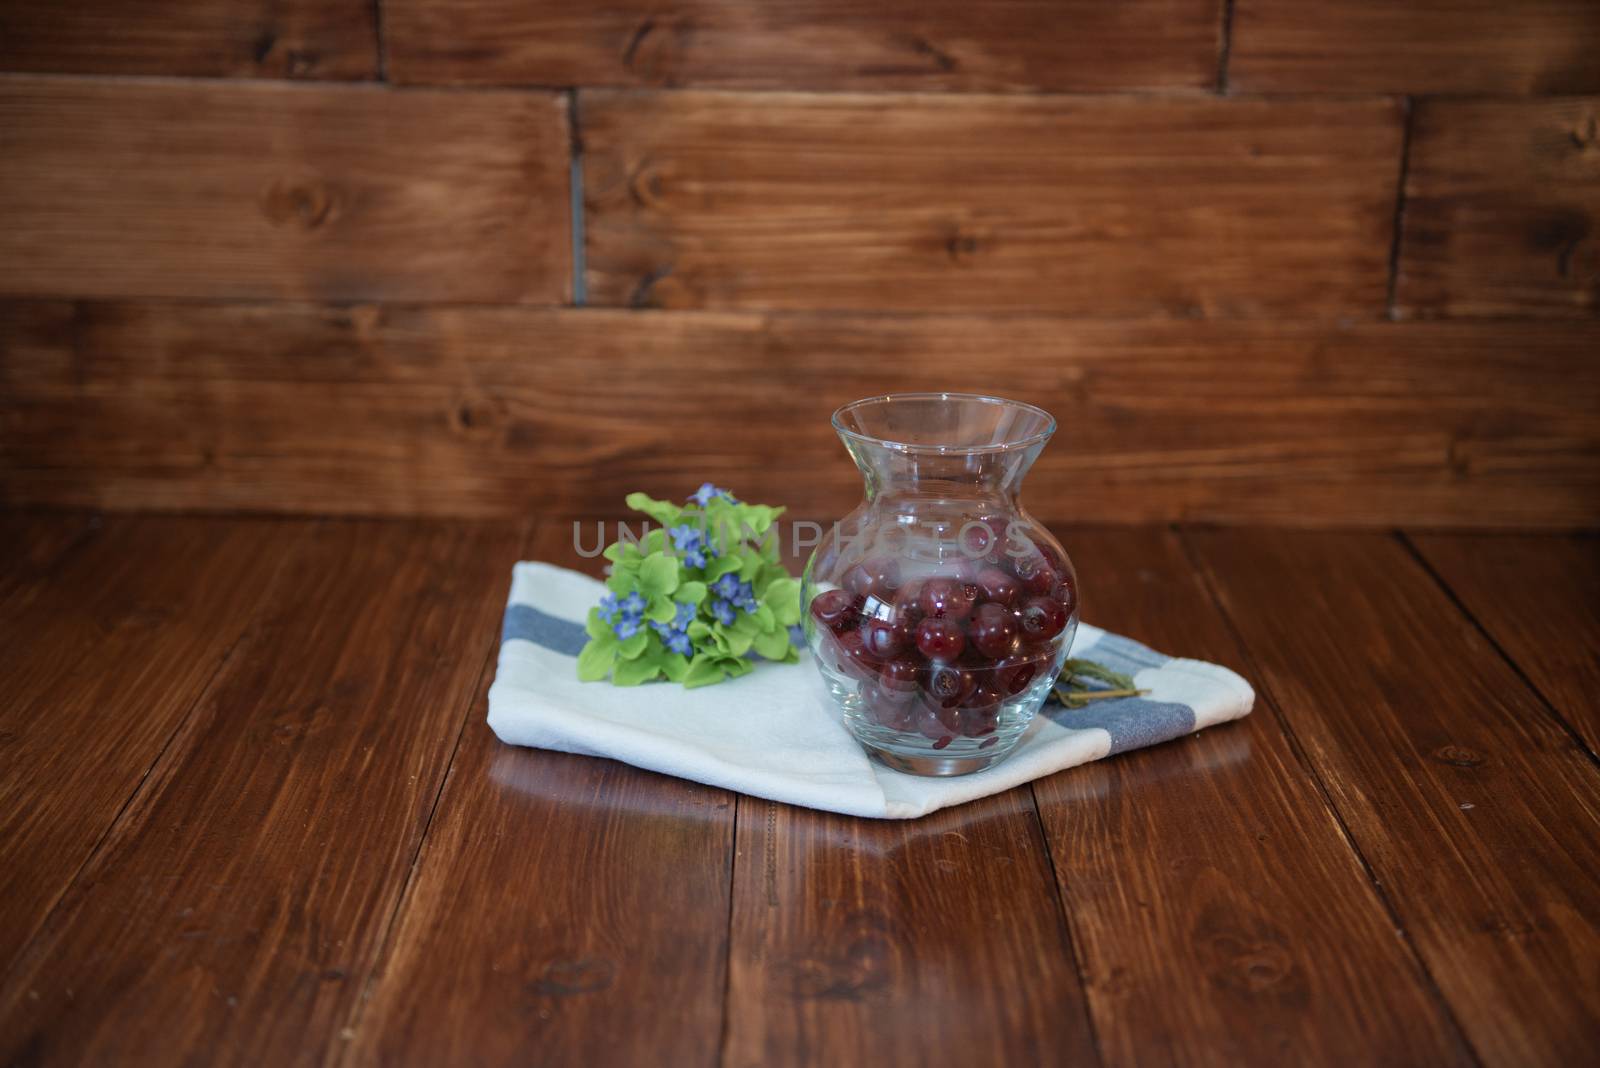 cherry in a vase on wooden background with towel